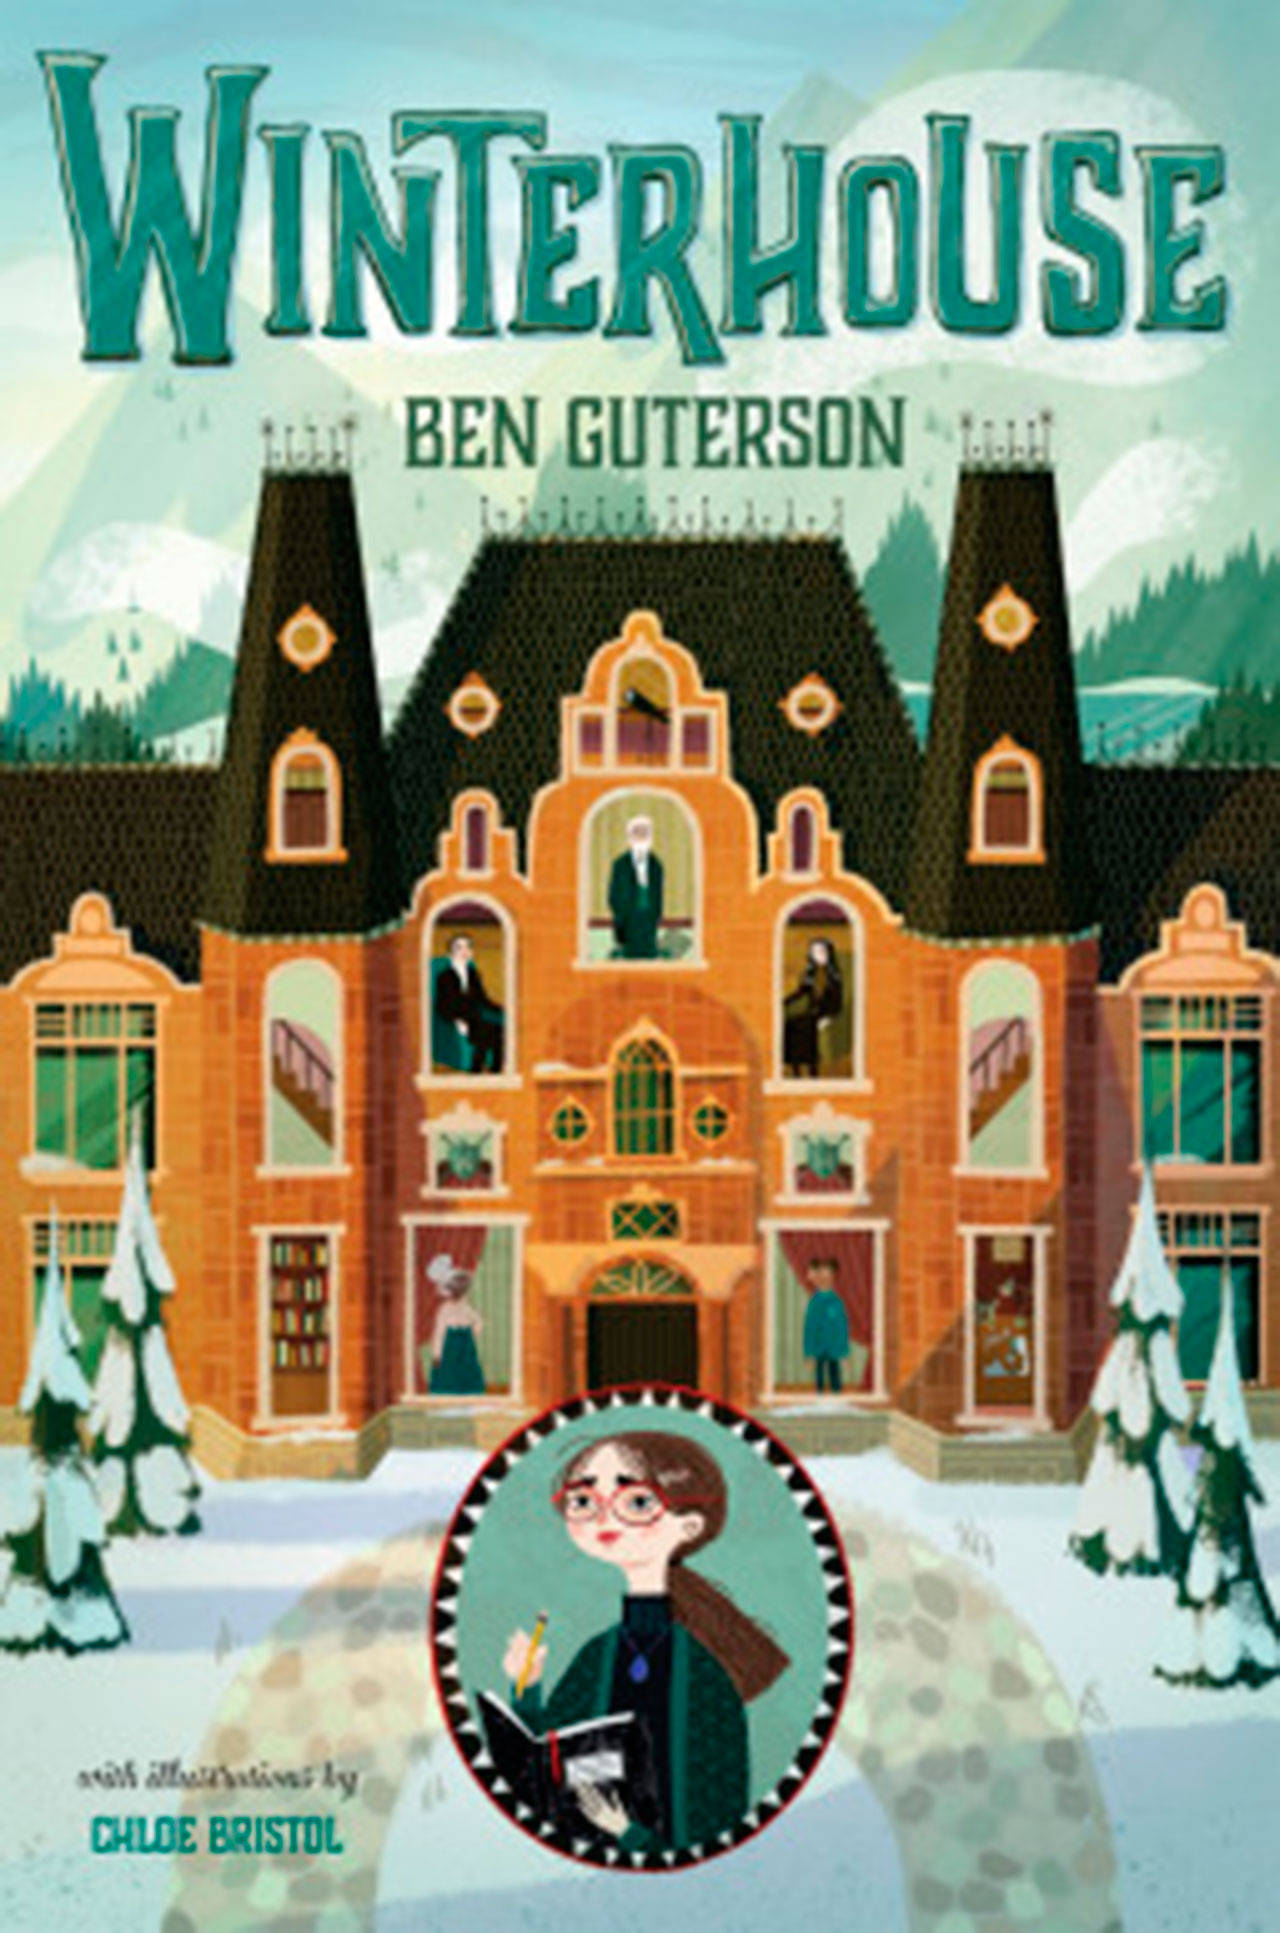 Image courtesy of Eagle Harbor Book Company | Ben Guterson will stop by Eagle Harbor Book Company at 6:30 p.m. Thursday, April 12 to discuss his new young adult urban fantasy novel “Winterhouse,” for middle readers ages 9-12.